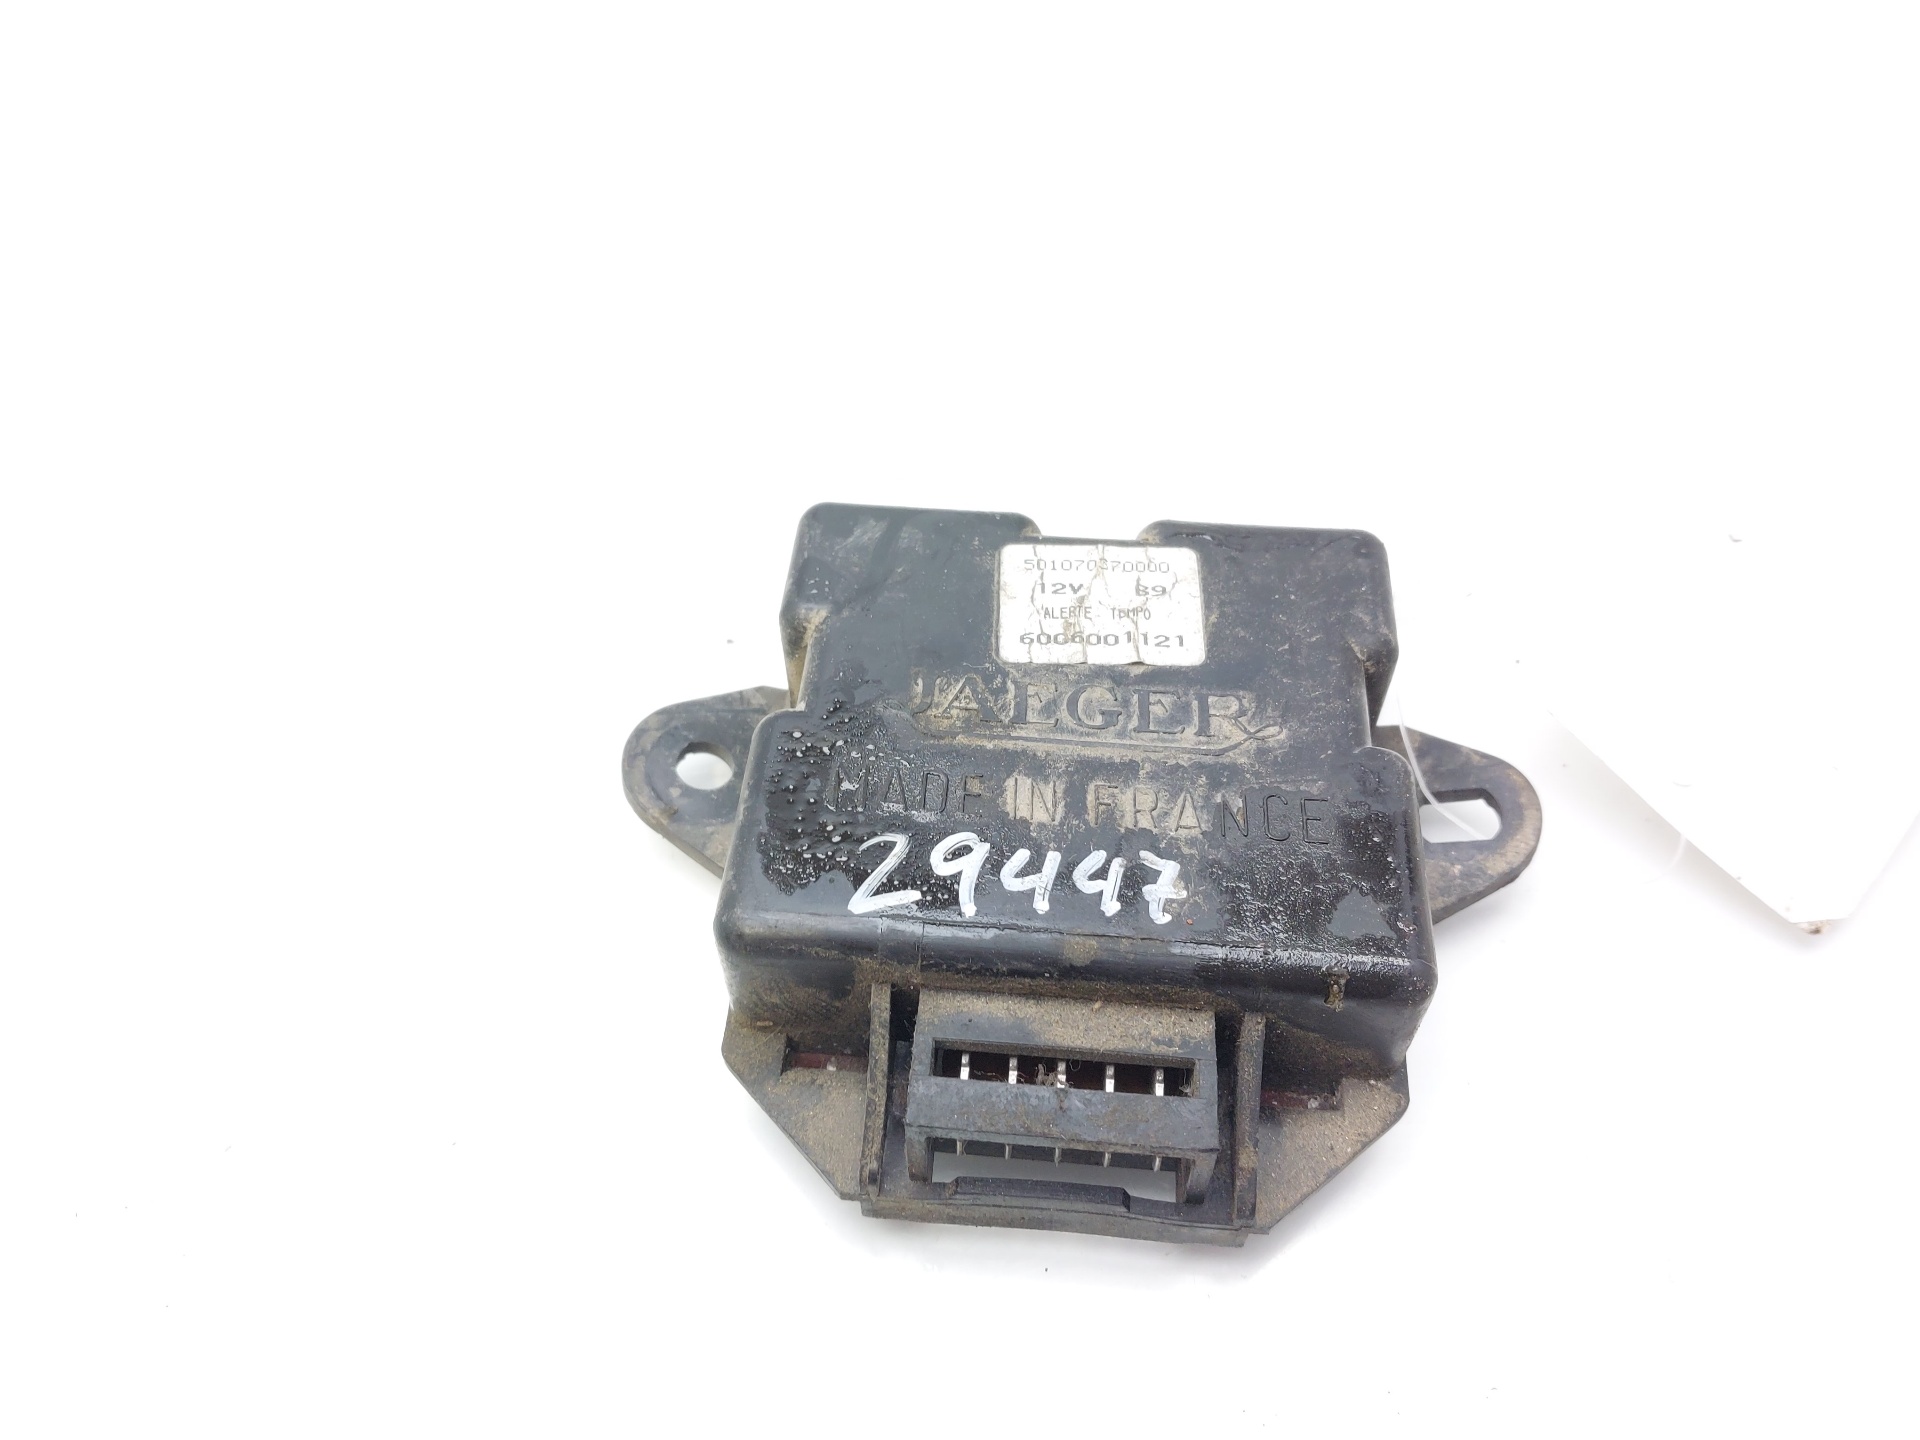 RENAULT Trafic W211/S211 (2002-2009) Relays 501070370000 25044917